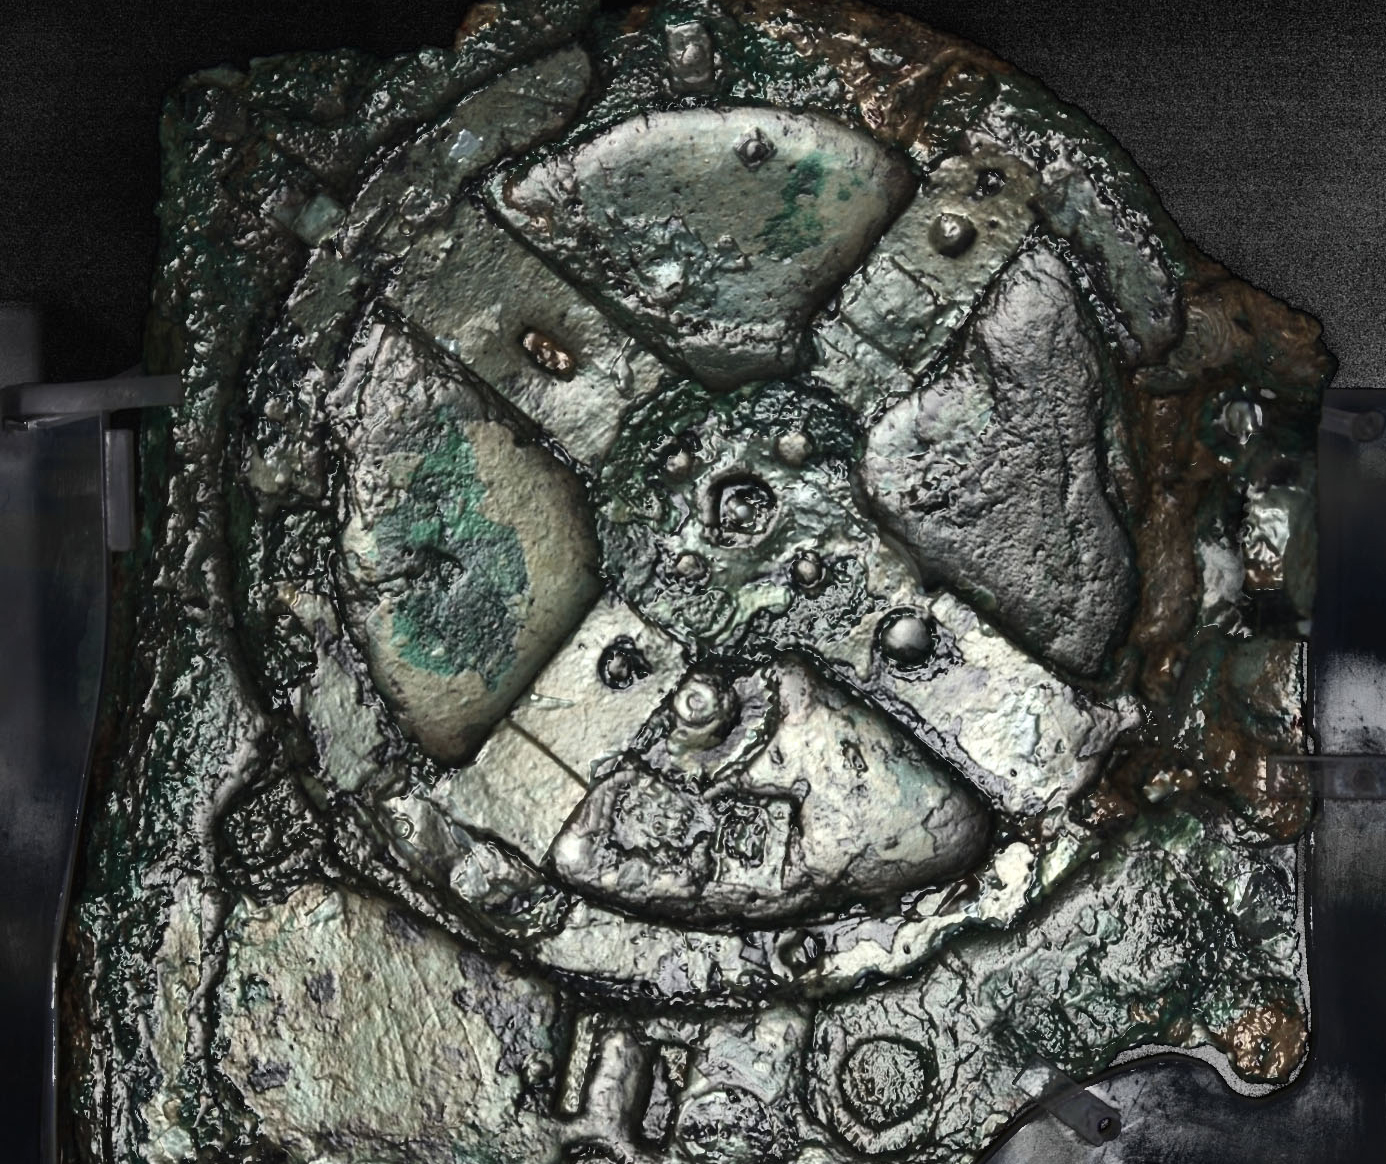 The Antikythera mechanism was similar in size to a mantel clock, and bits of wood found on the fragments suggest it was housed in a wooden case